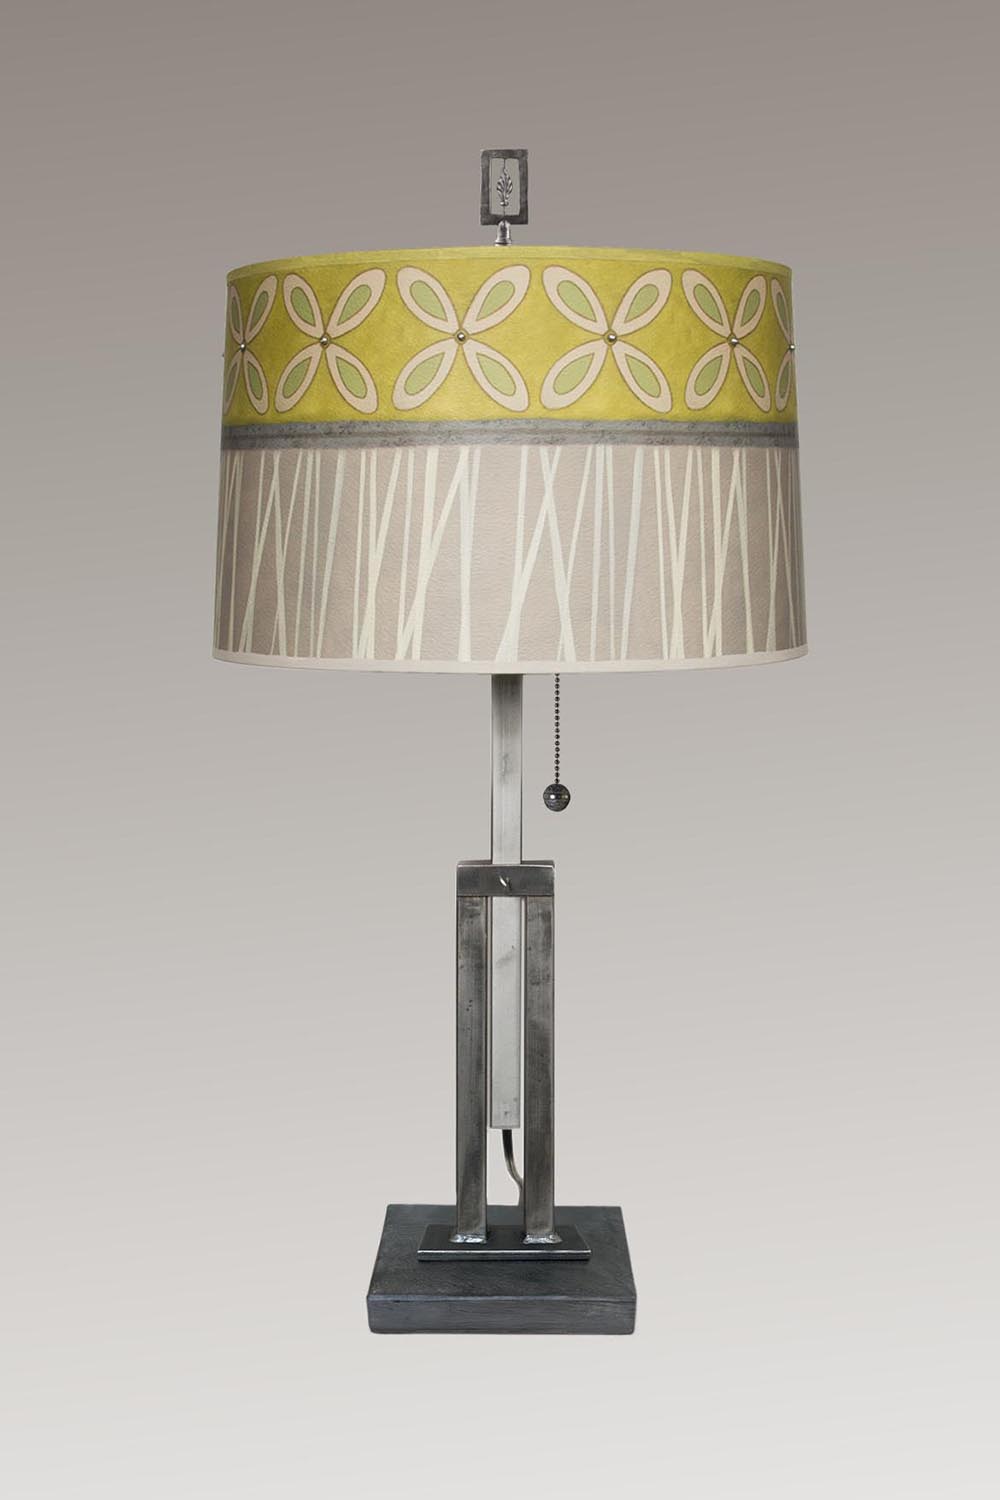 Janna Ugone & Co Table Lamps Adjustable-Height Steel Table Lamp with Large Drum Shade in Kiwi